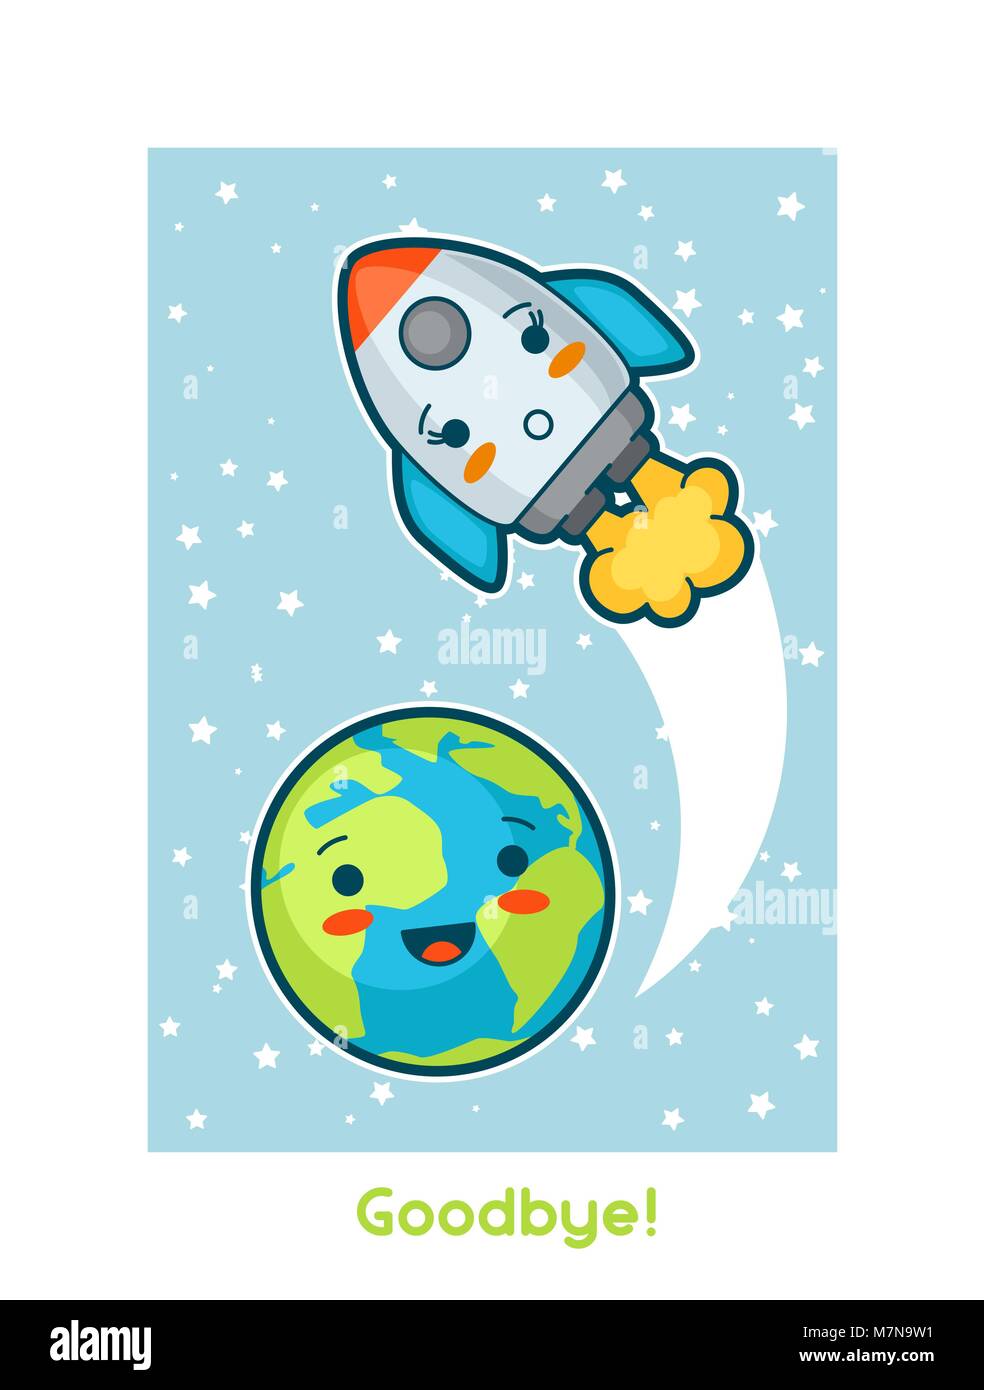 Goodbye. Kawaii space funny card. Doodles with pretty facial expression. Illustration of cartoon earth and rocket Stock Vector